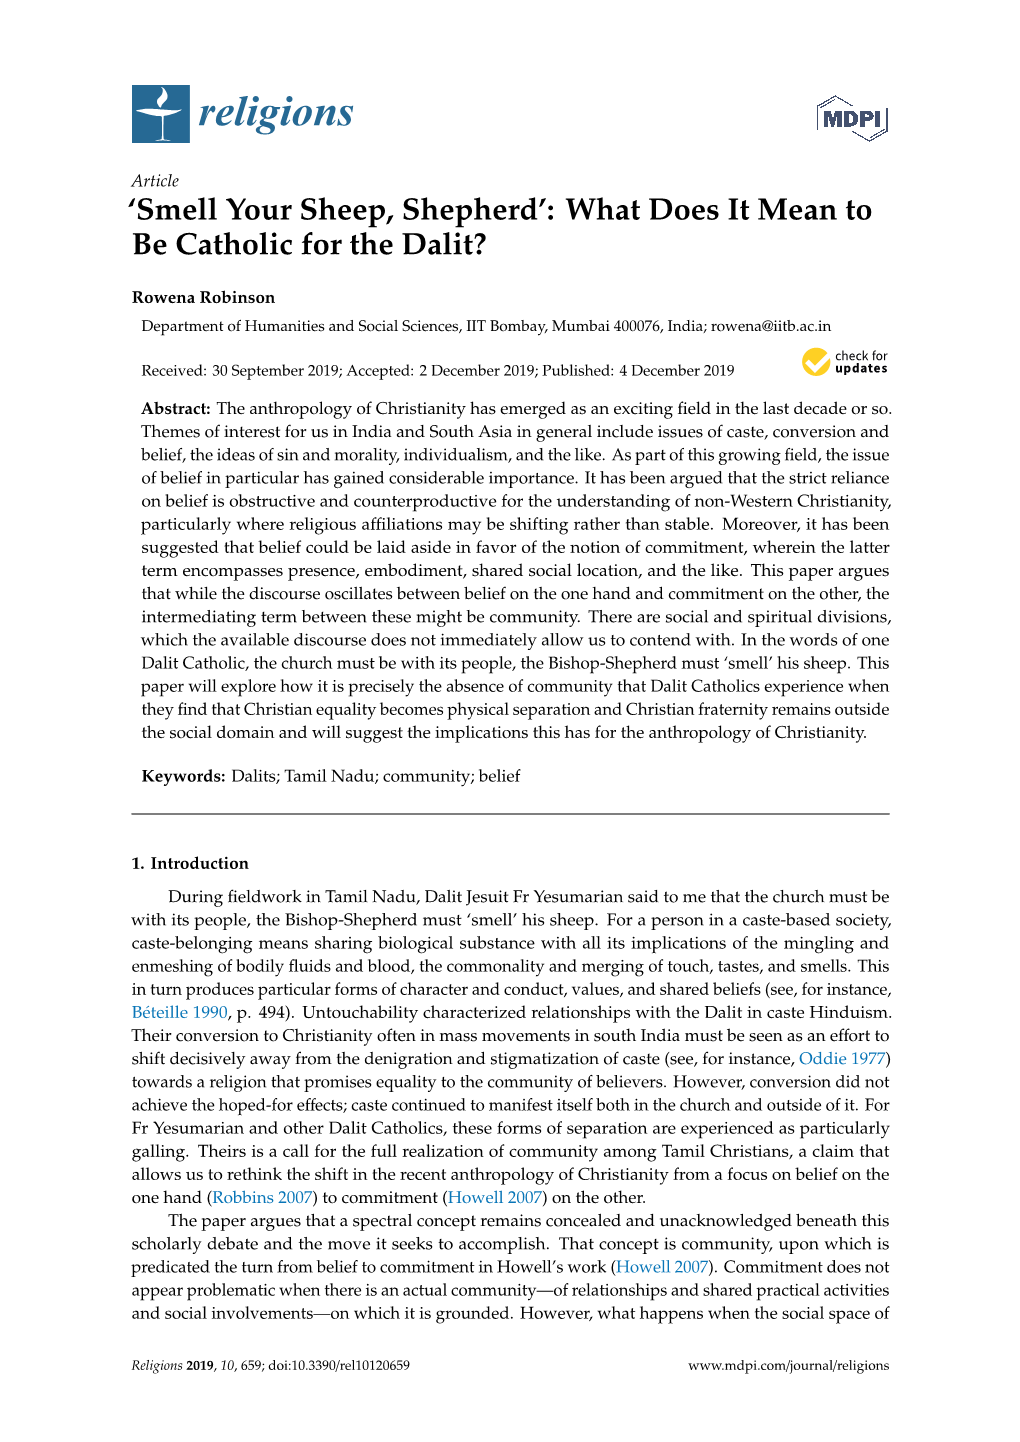 What Does It Mean to Be Catholic for the Dalit?